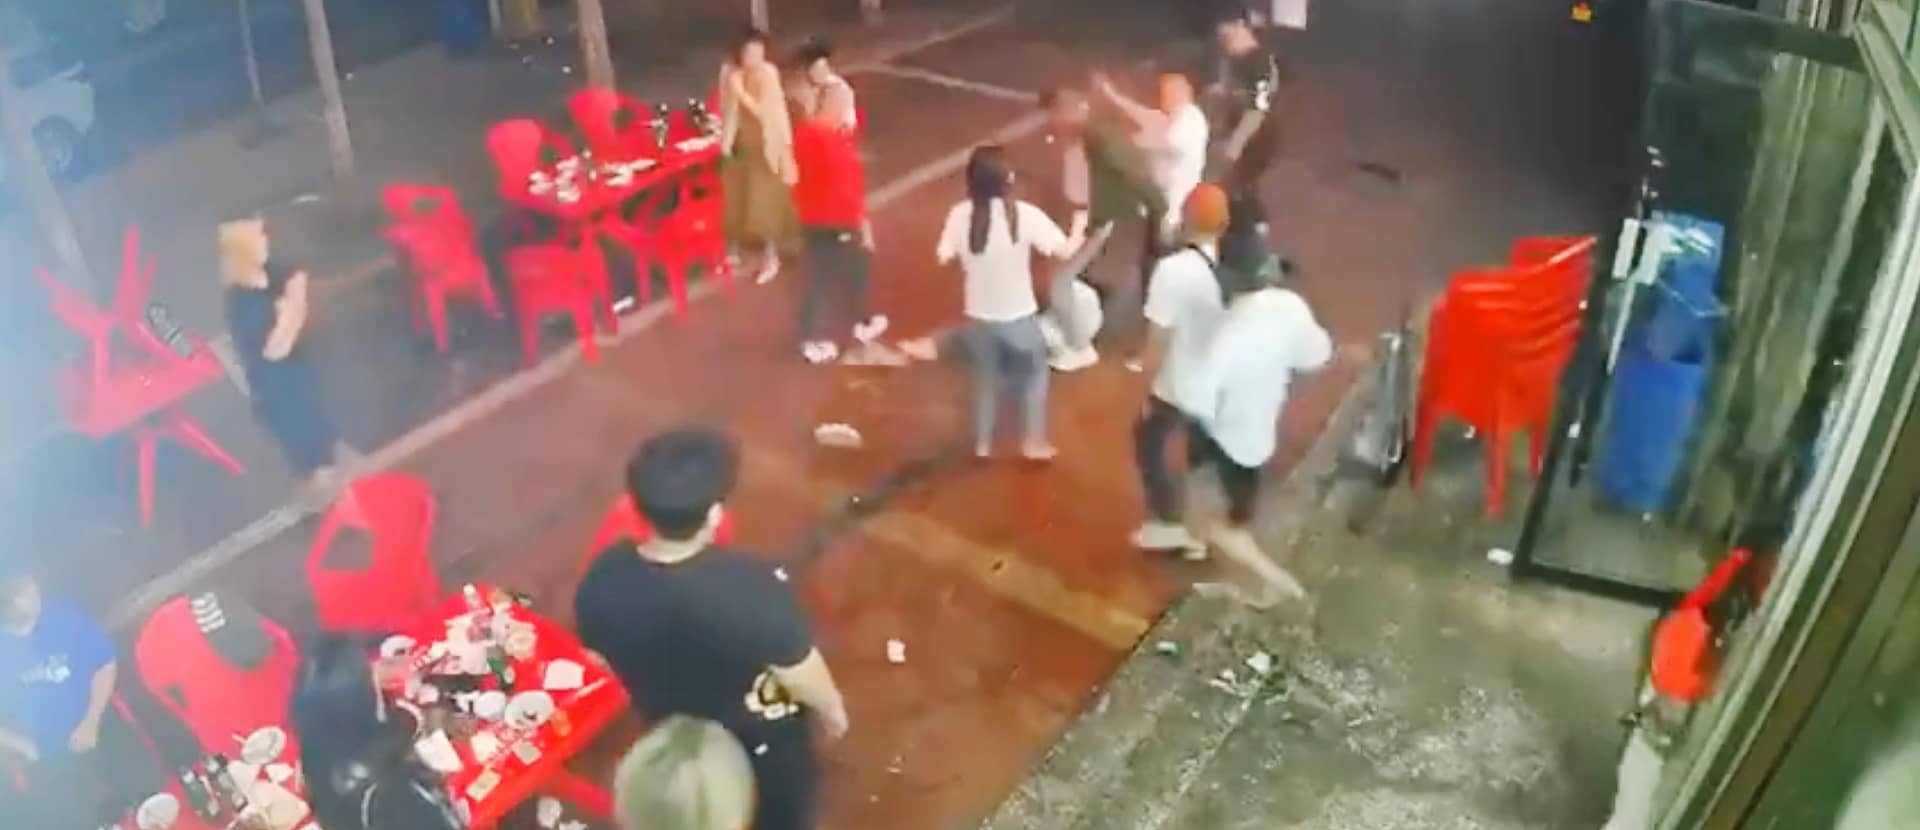 China jails man for 24 years over attack on women at restaurant